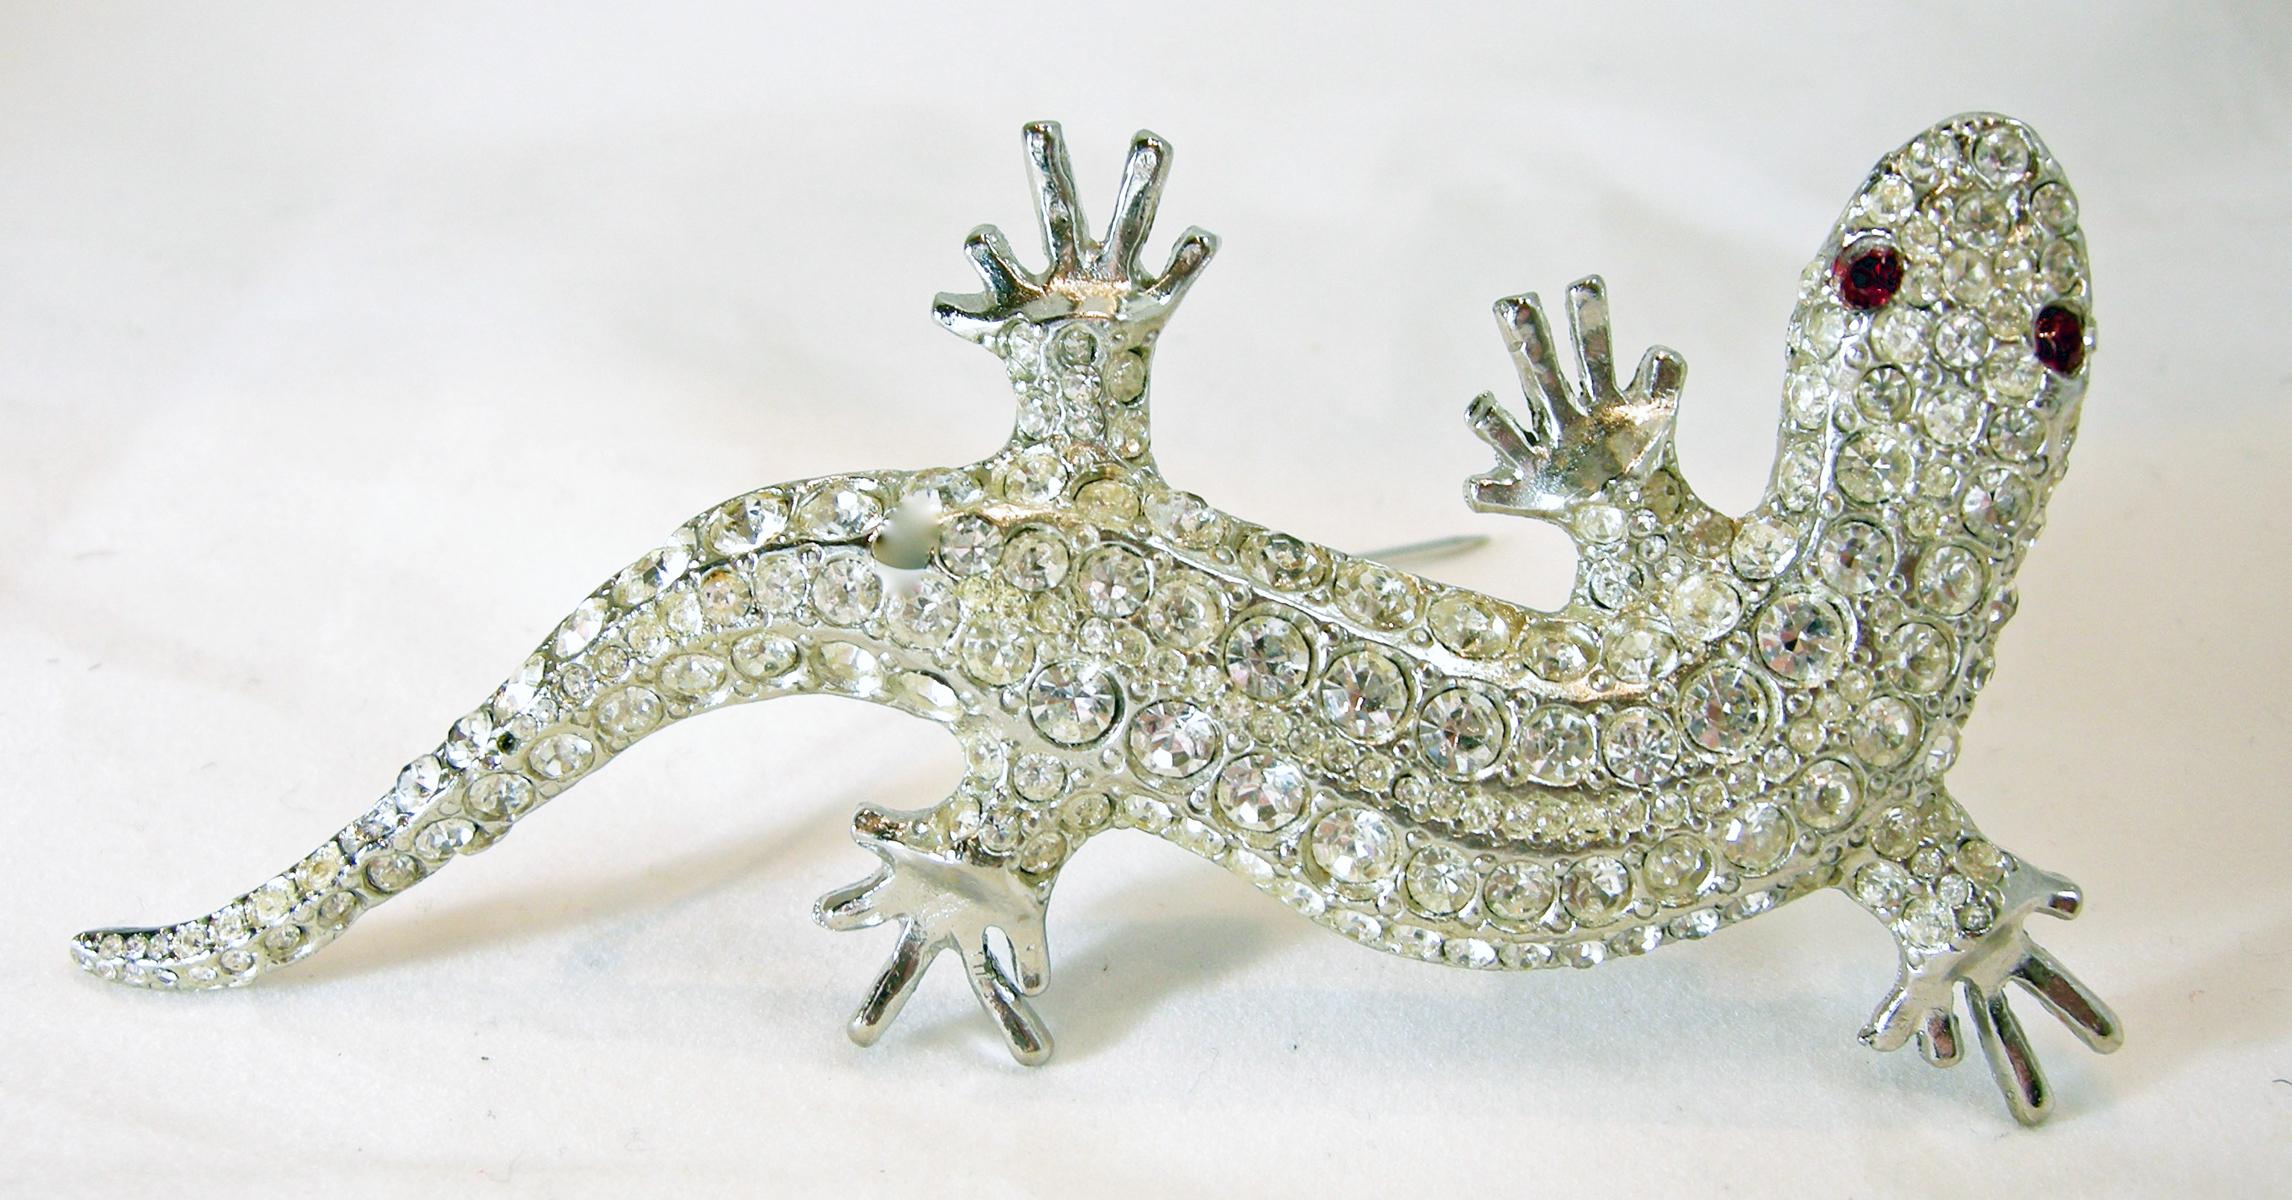 This vintage Kirks Folly salamander brooch has clear crystals throughout its body and red crystal eyes in a silver tone setting.  In excellent condition, this brooch measures 4-1/2” x 2-1/4”.